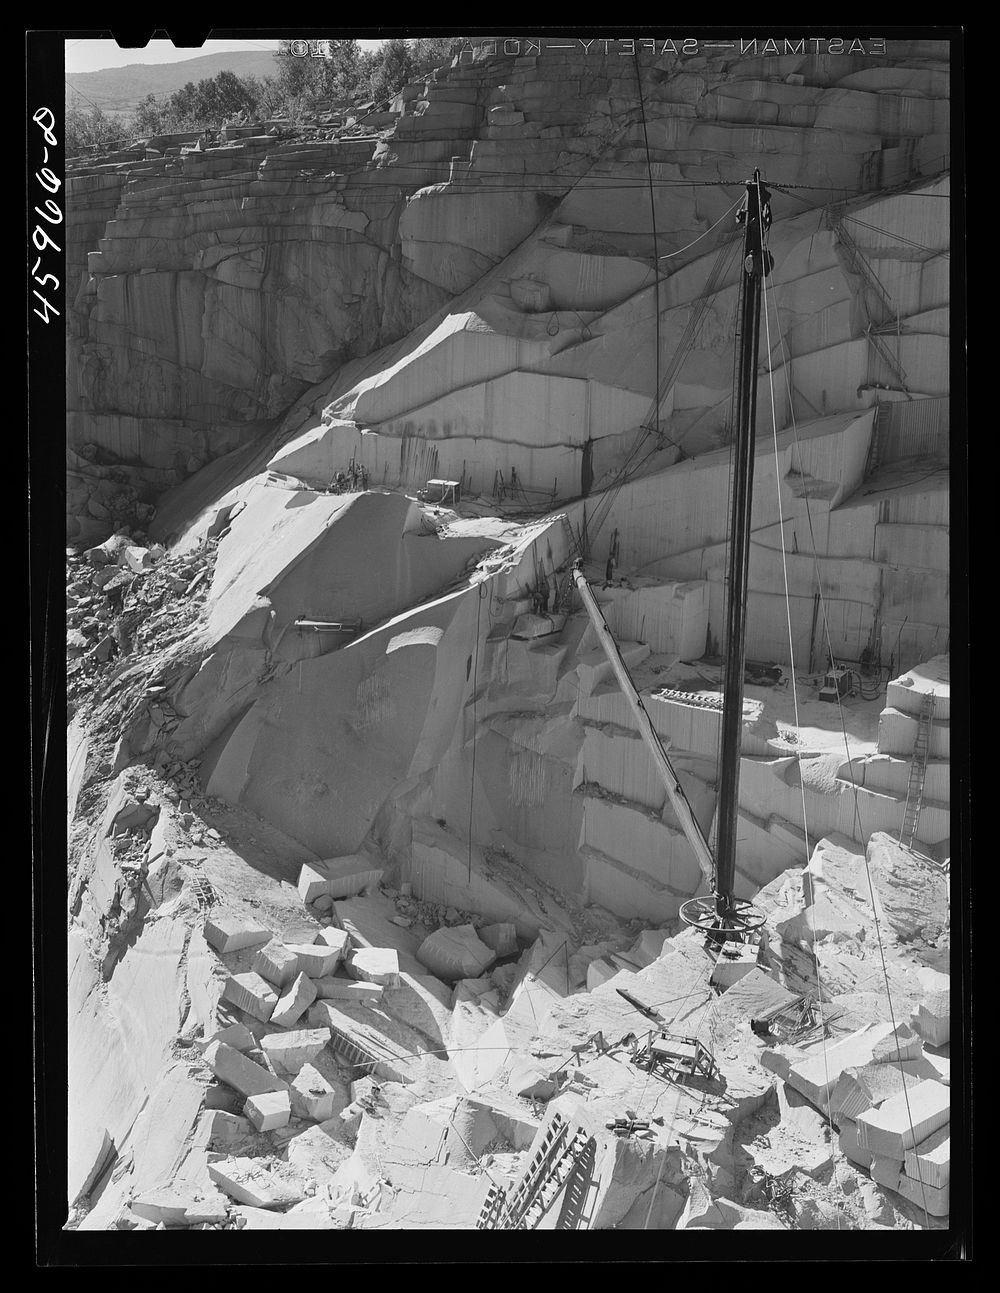 At the Morse and Whitmore granite quarries in East Barre, Vermont. Sourced from the Library of Congress.